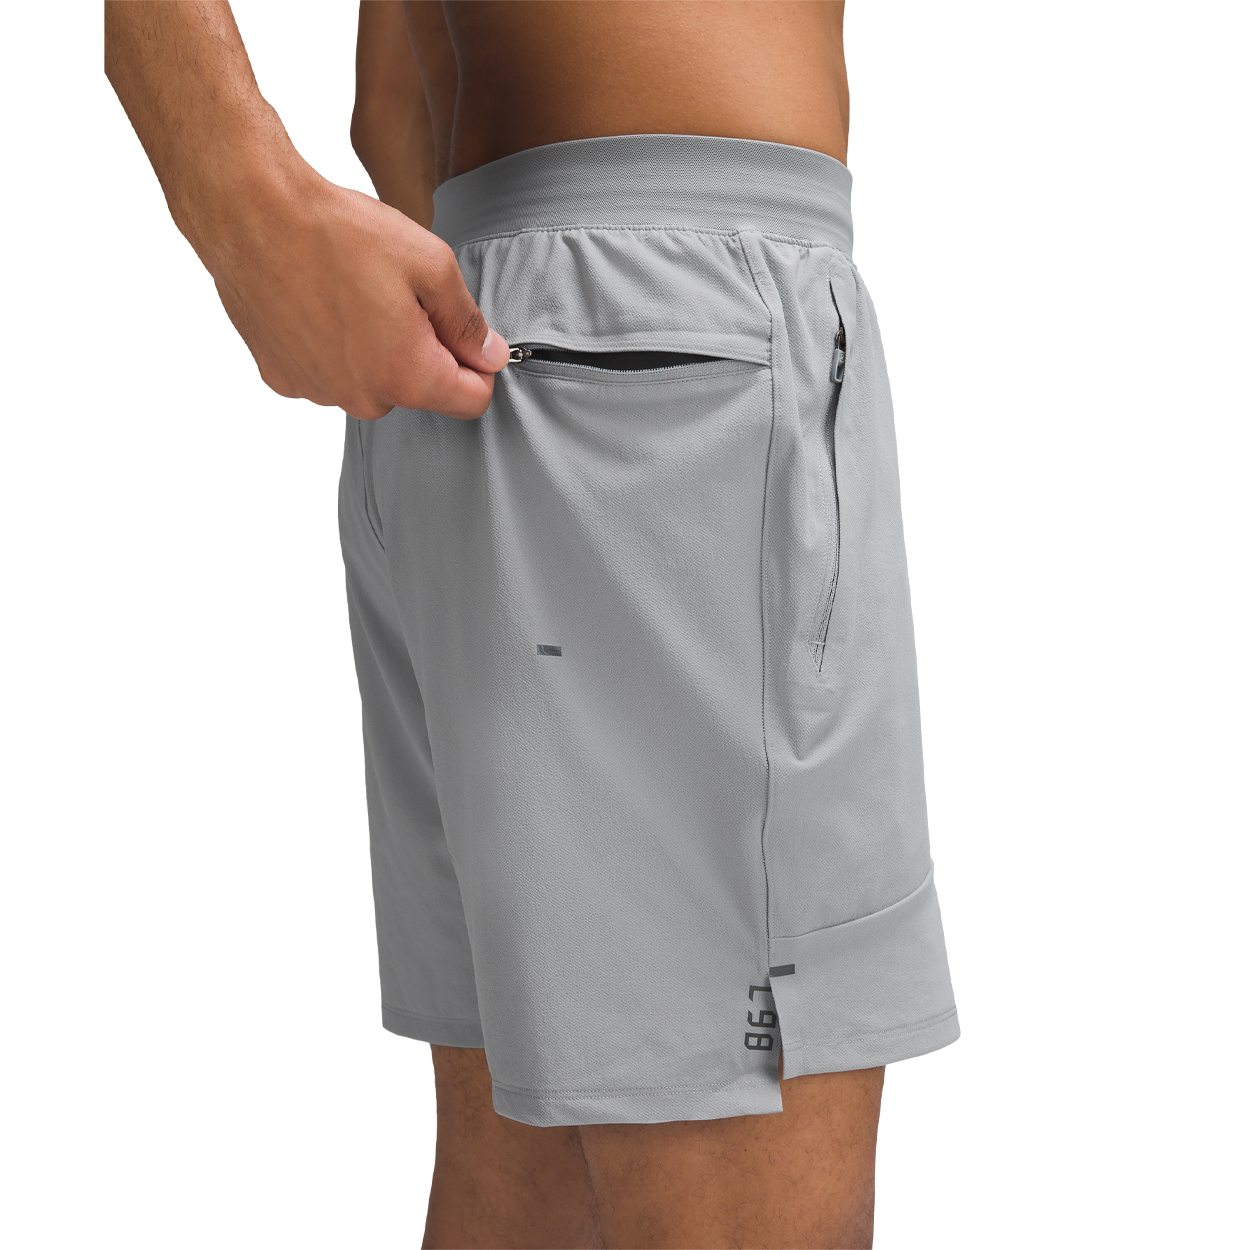 Under Armour Running Shorts On Sale for $11